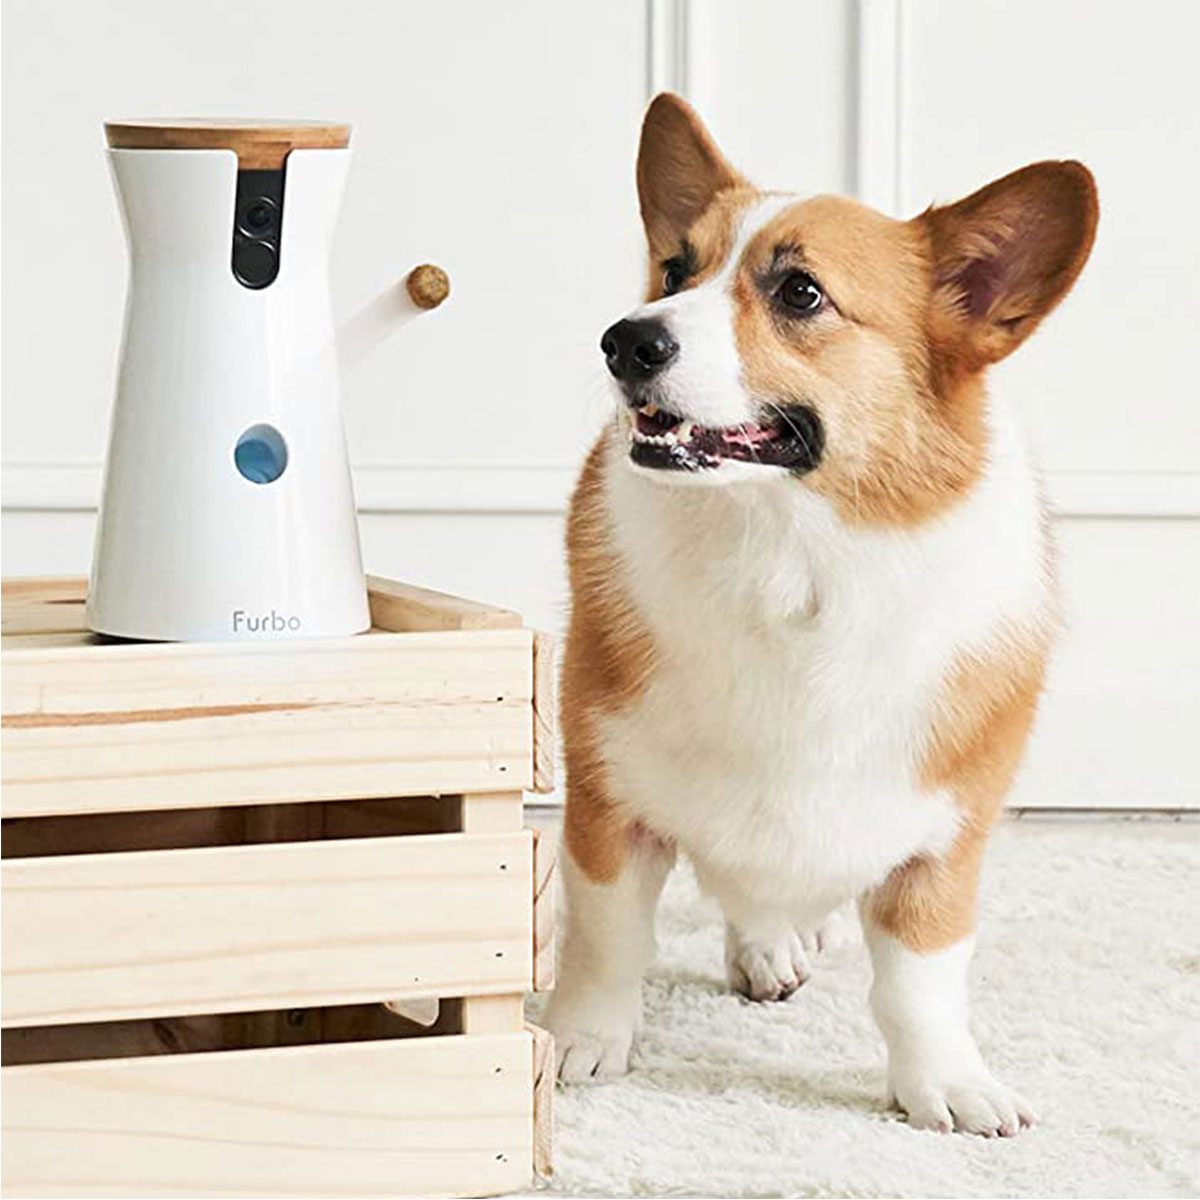 This Pet Camera Helps You Keep An Eye On Your Furry Friends While You're Away